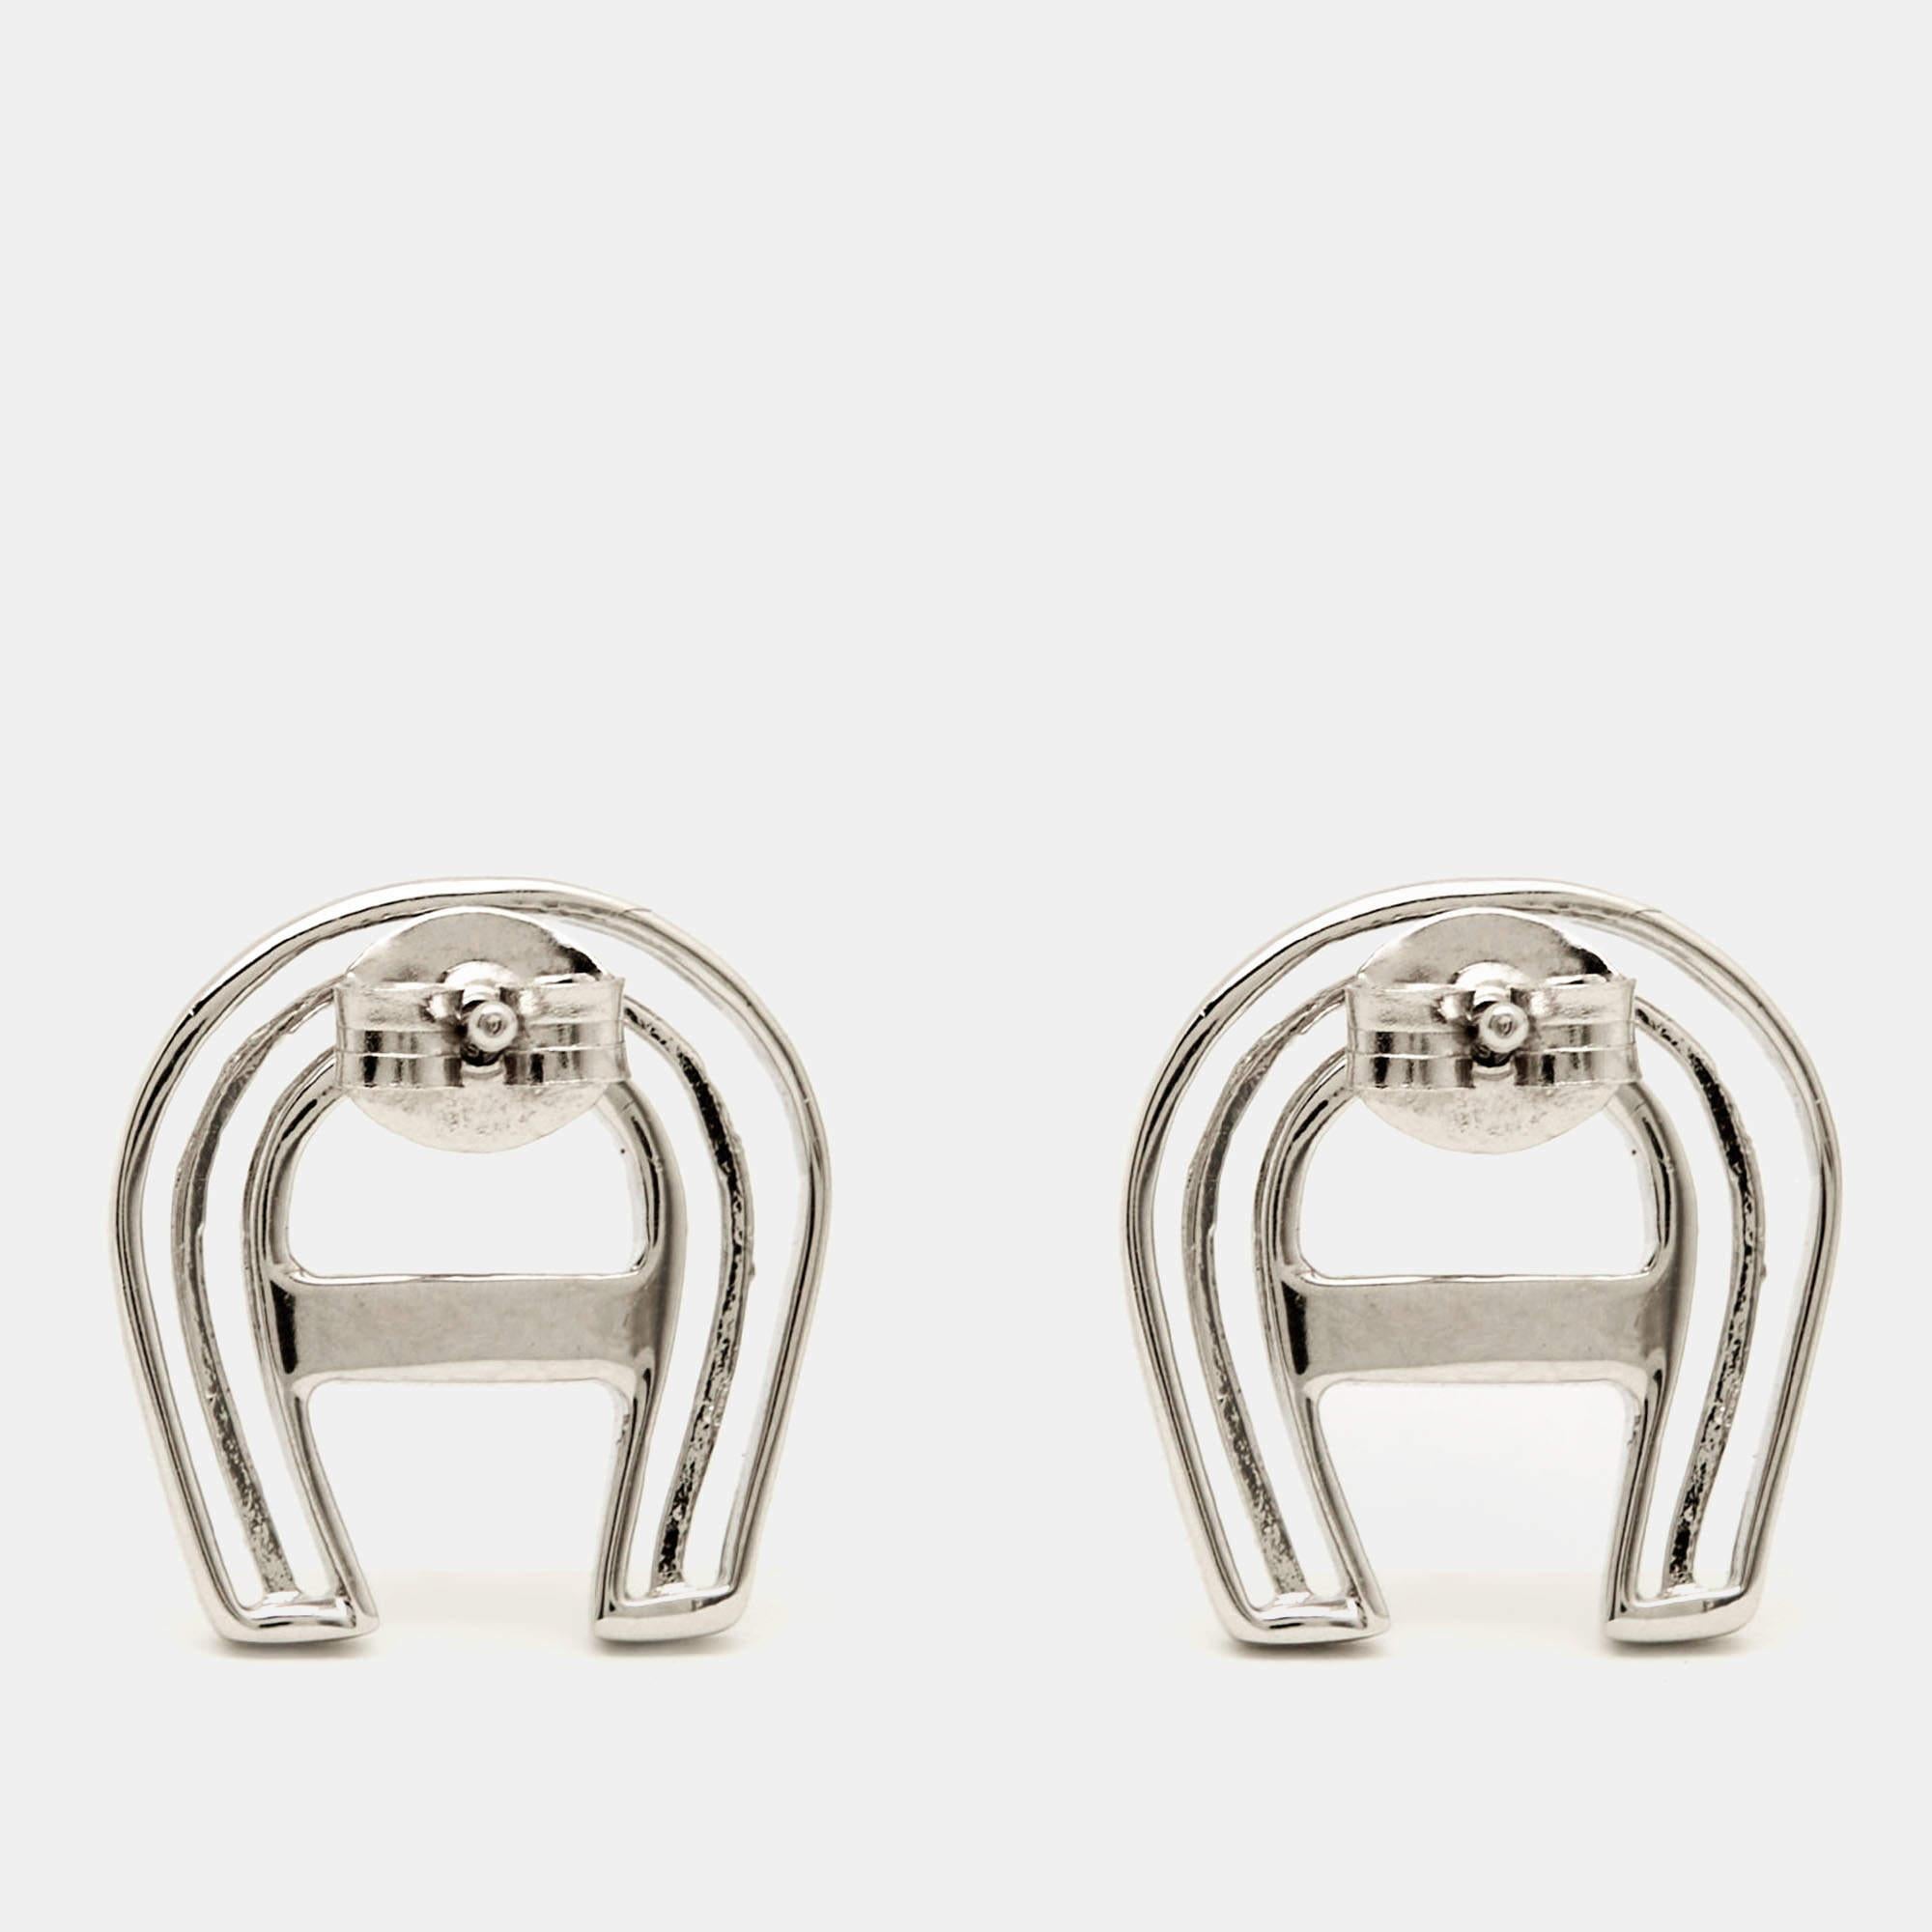 Complete a chic outfit with this pair of Aigner earrings. The design is meticulously crafted as the brand's logo for a signature appeal.

Includes: Original Pouch

